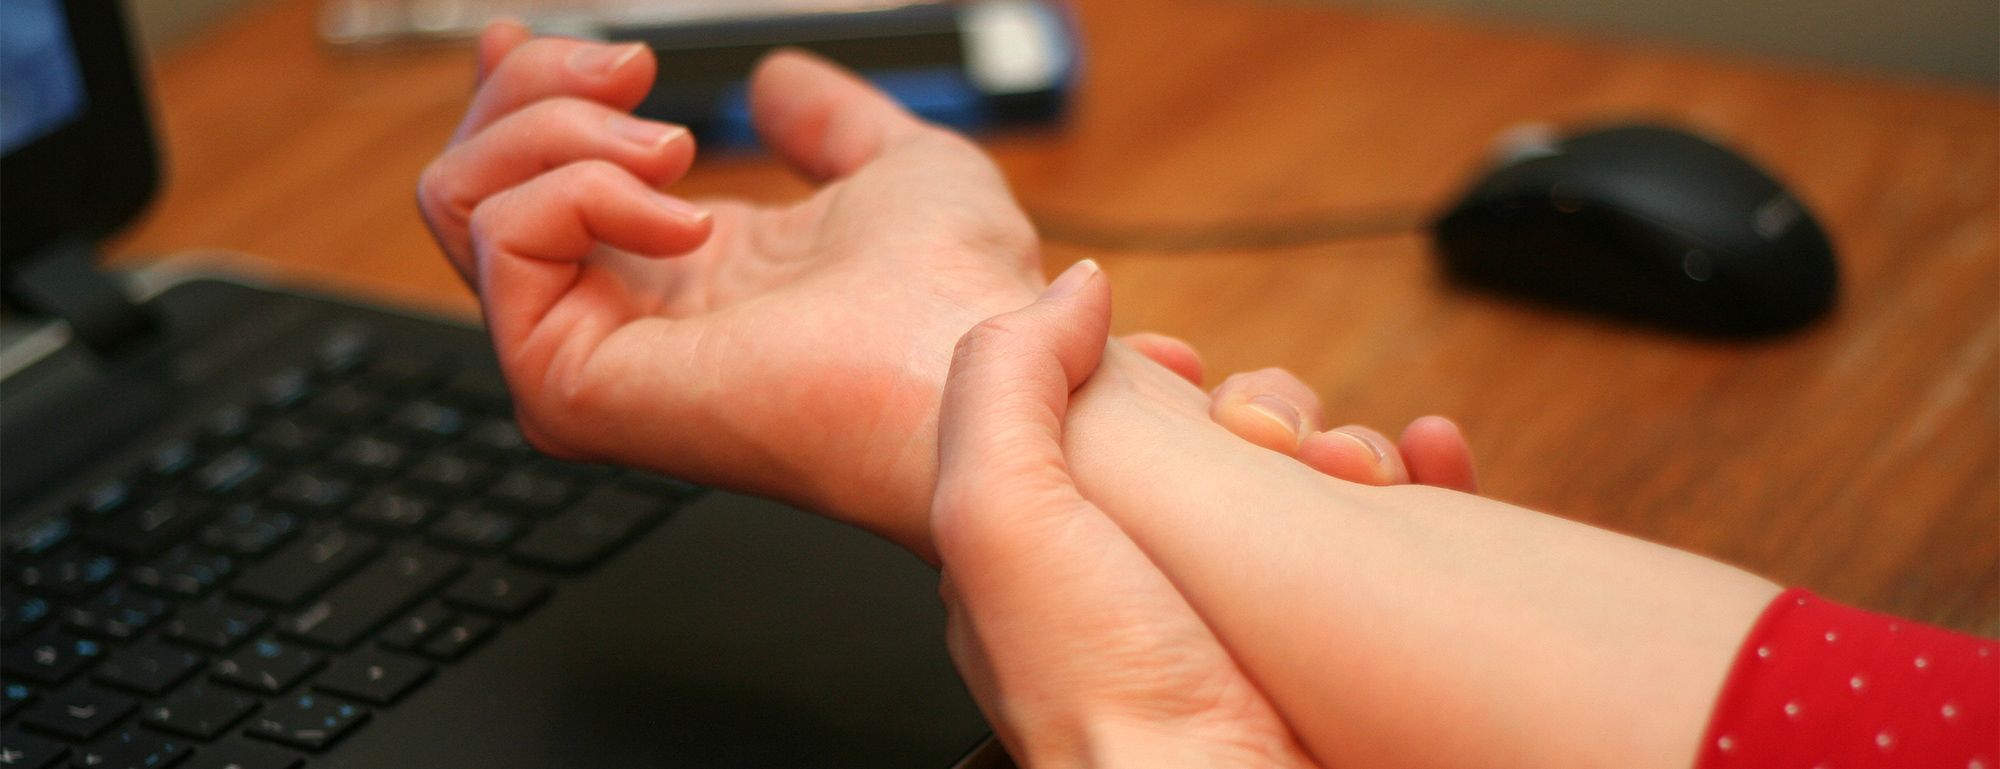 Learning About Carpal Tunnel Syndrome | Chiropractic Care San Diego